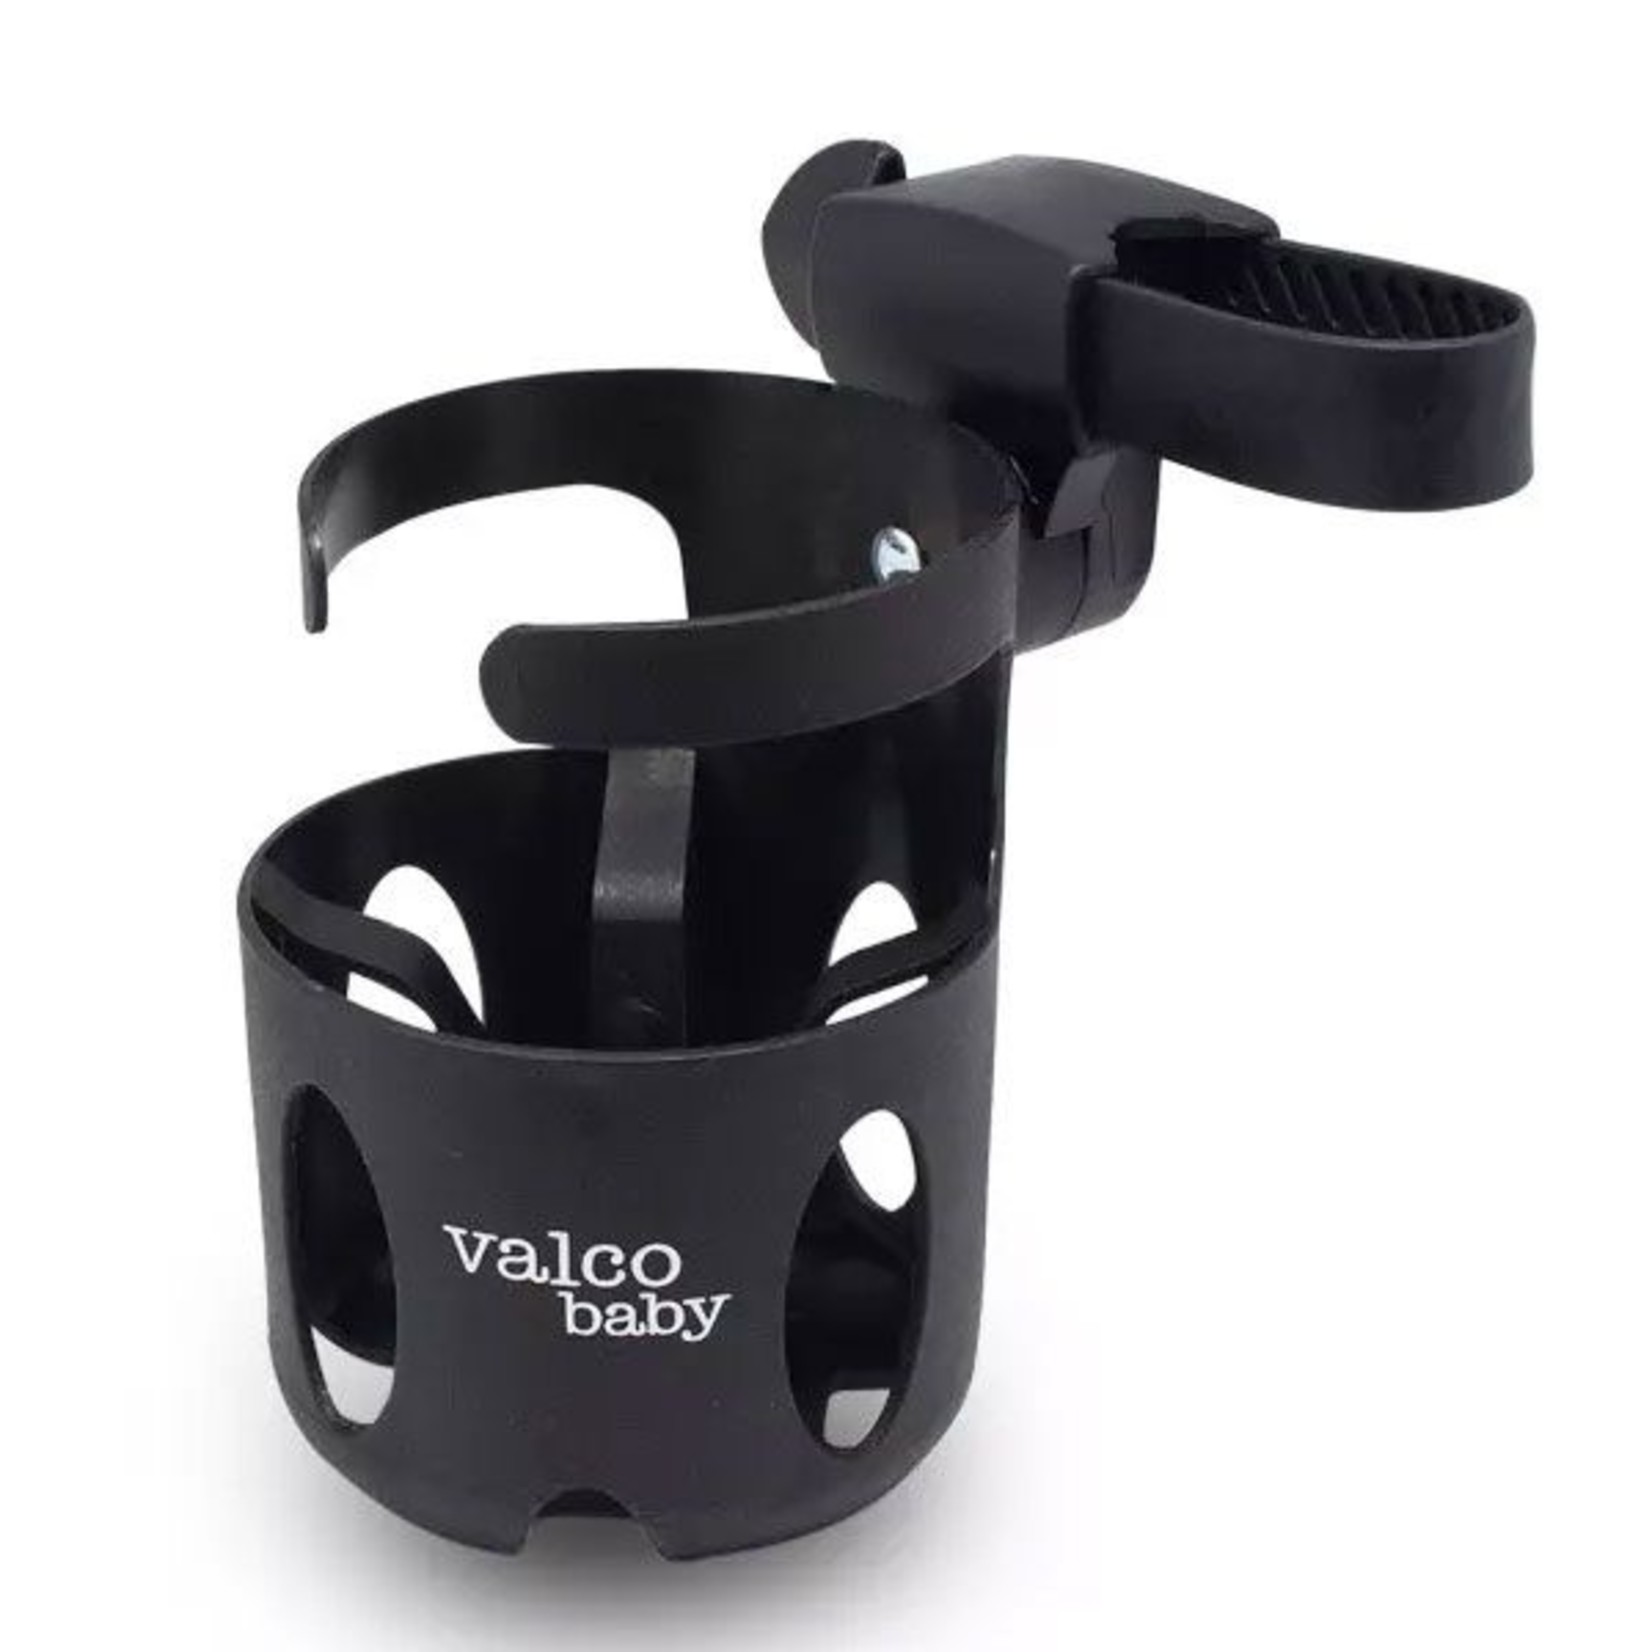 Valco Baby Universal Cup holder -black (ACC5951)